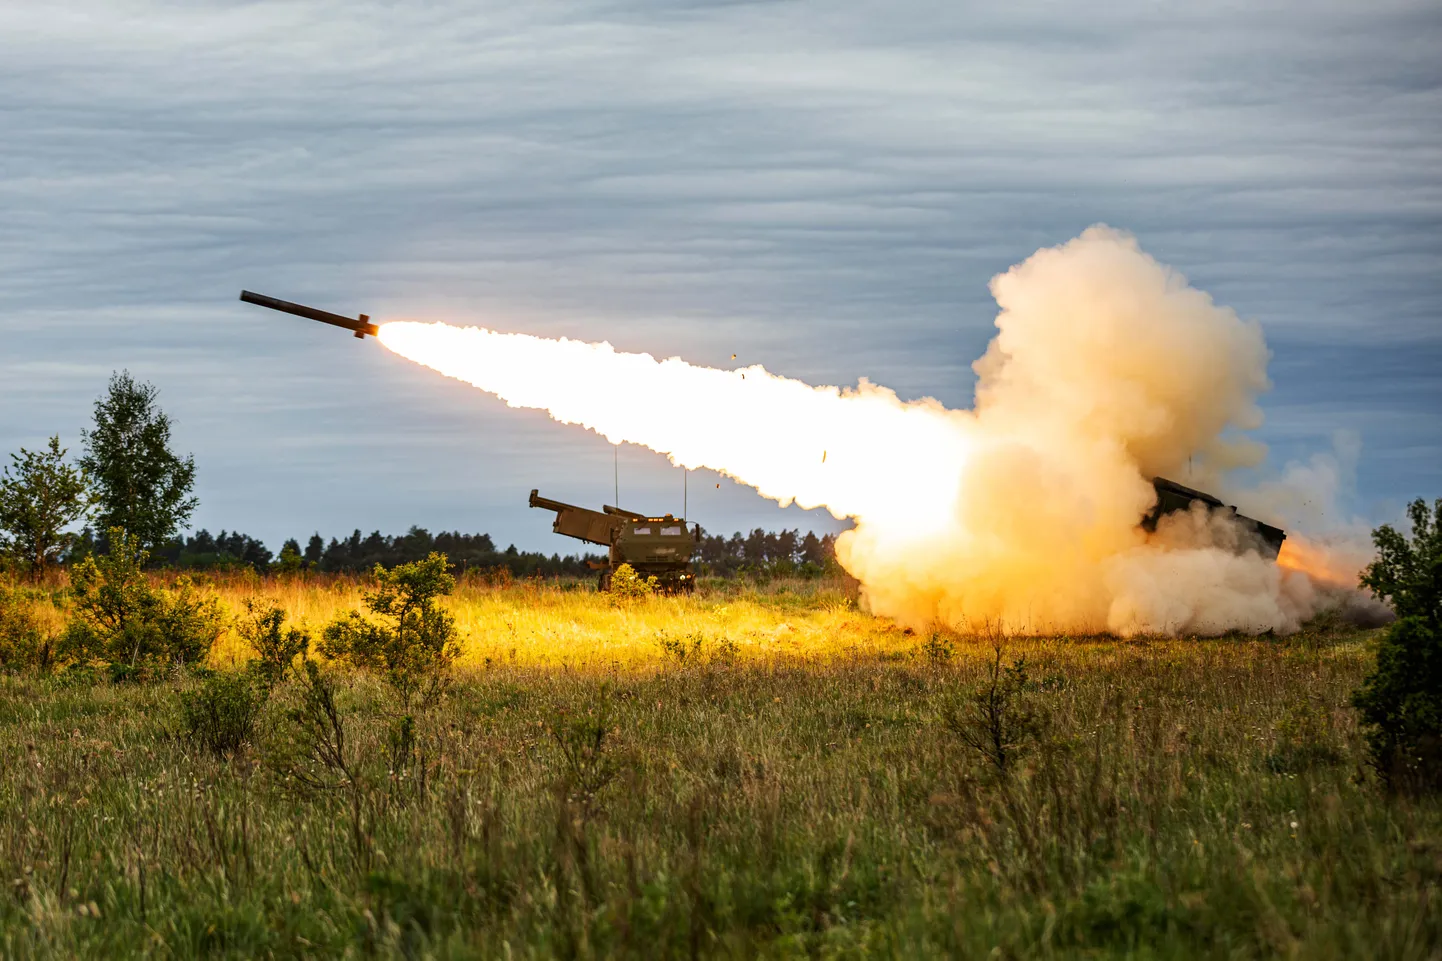 HIMARS multiple rocket launchers from the United States can now fire from the Kharkiv region into Russia. Without Moscow's strategic miscalculation in attacking the region, Ukraine would not have received permission from multiple Western countries to strike Russian territory.